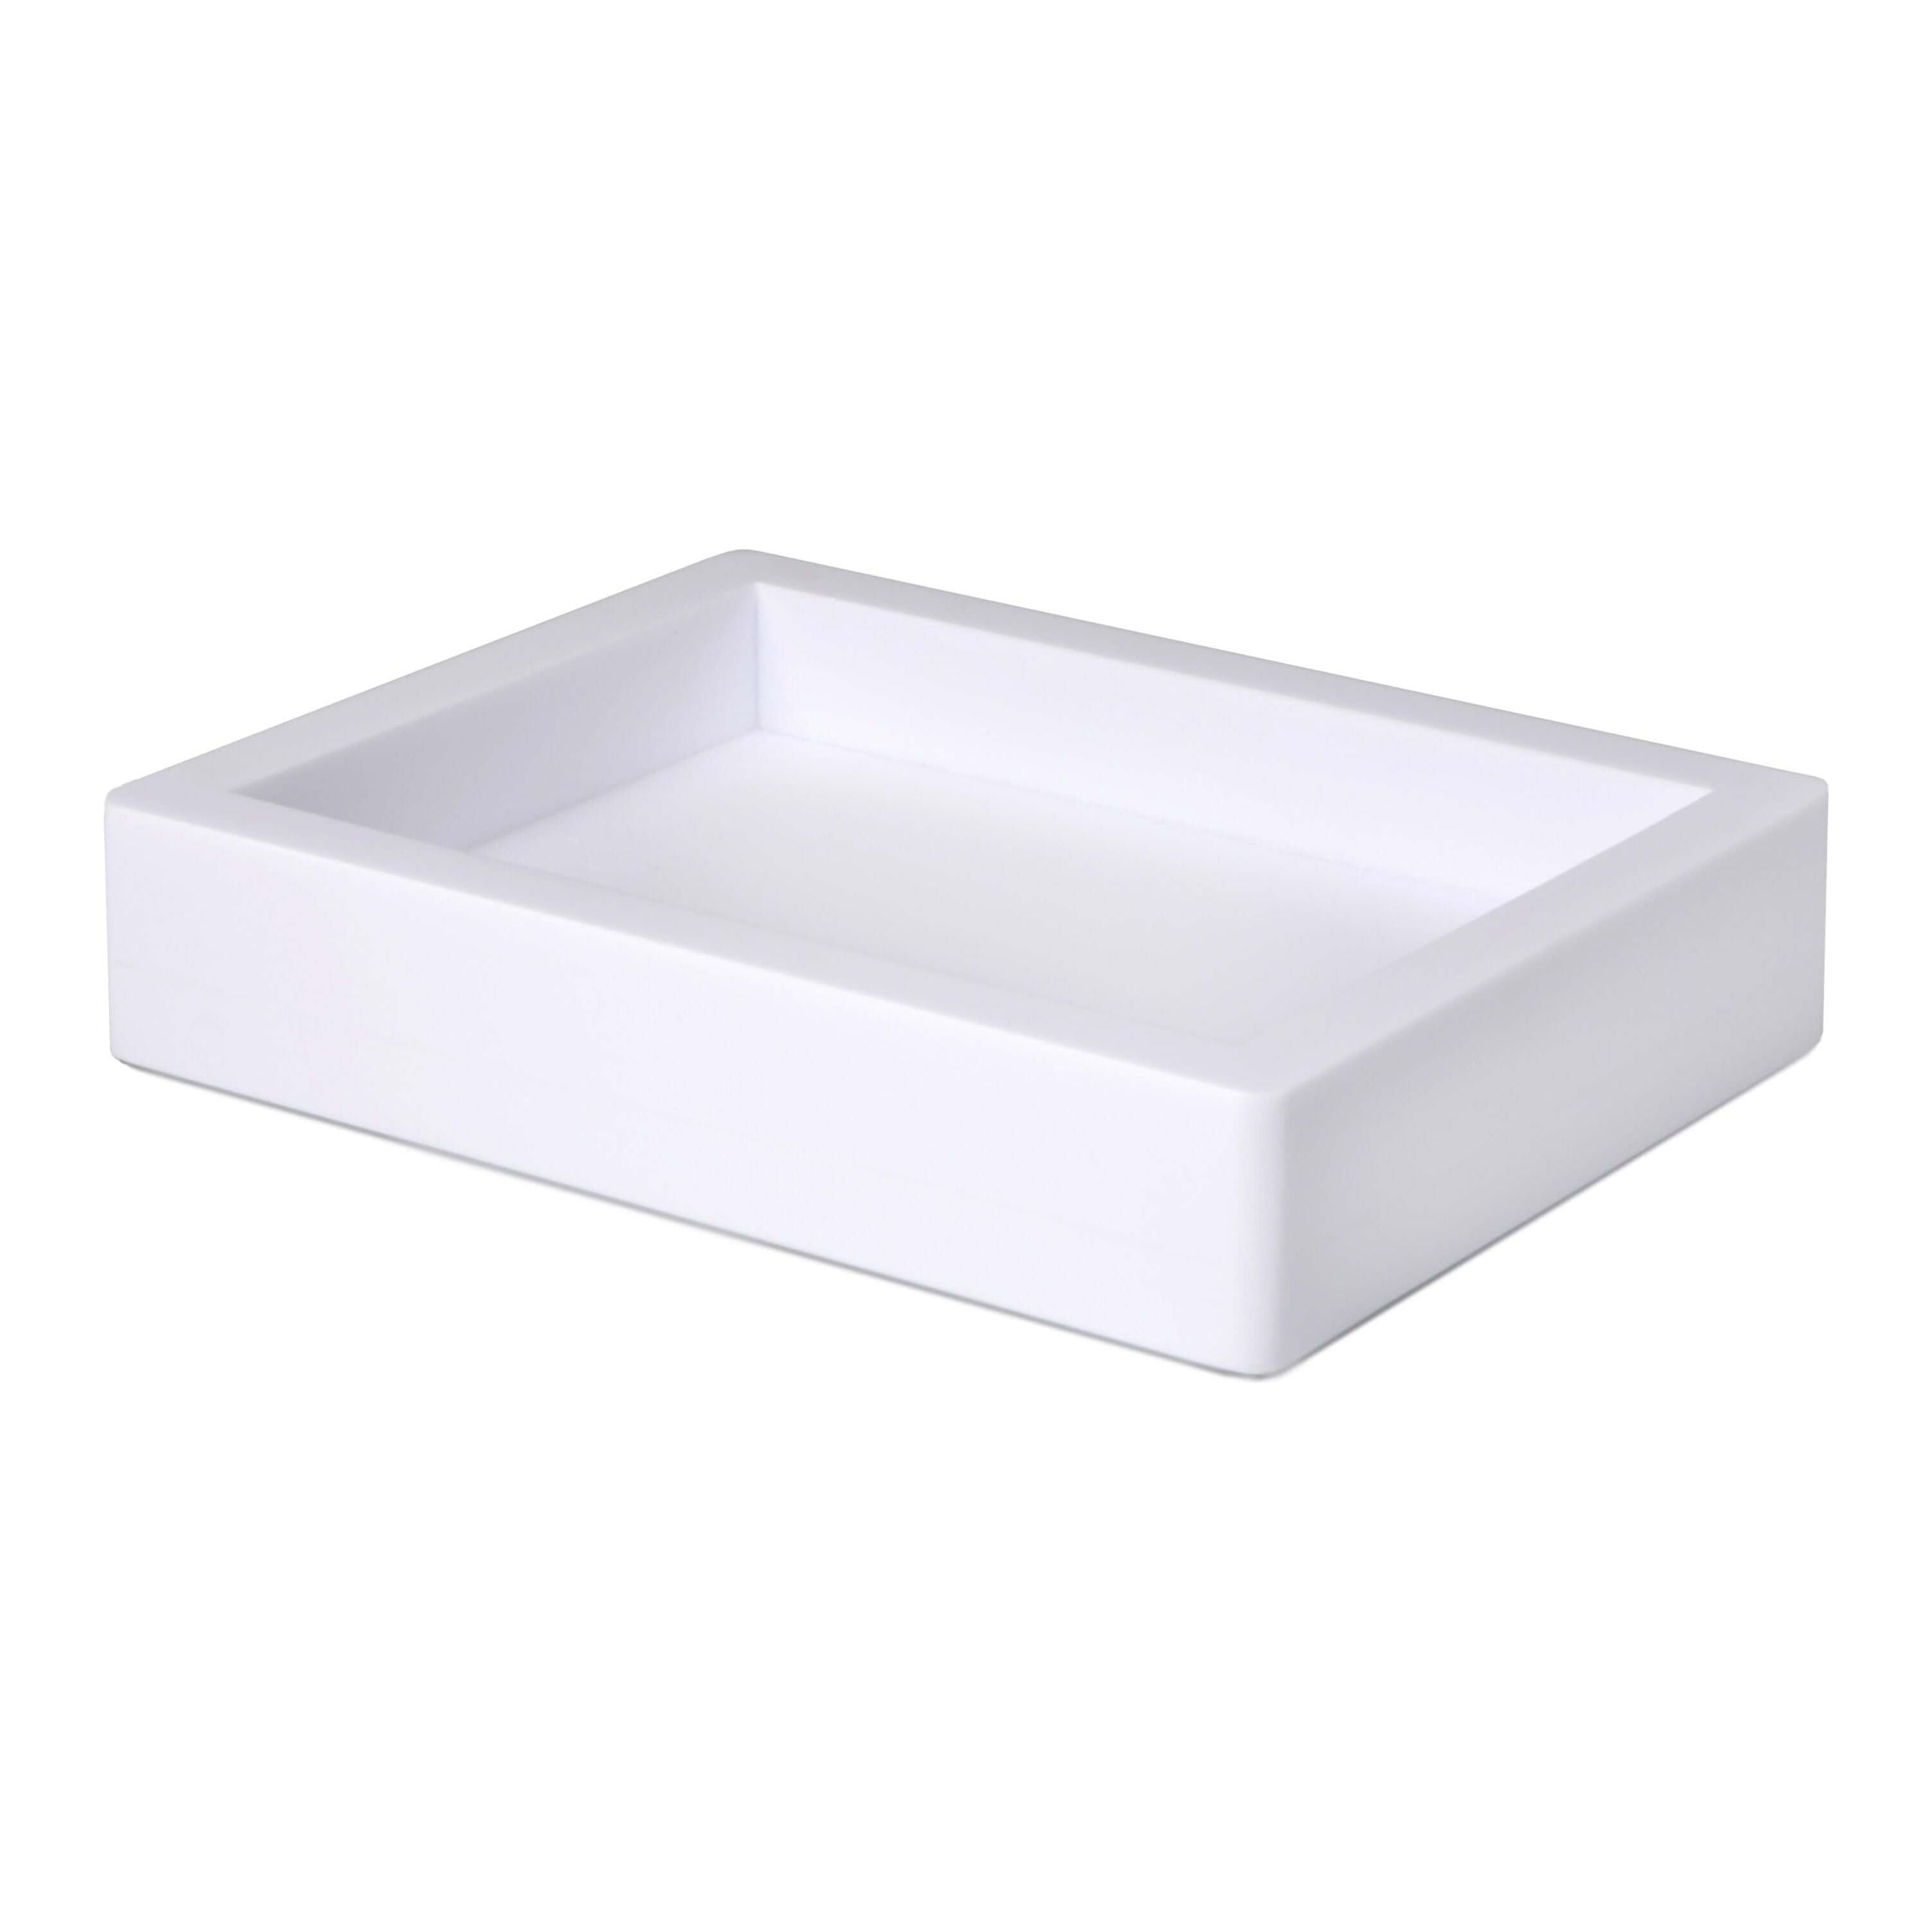 Mike + Ally - Contours Vanity tray - 52035 - White - 